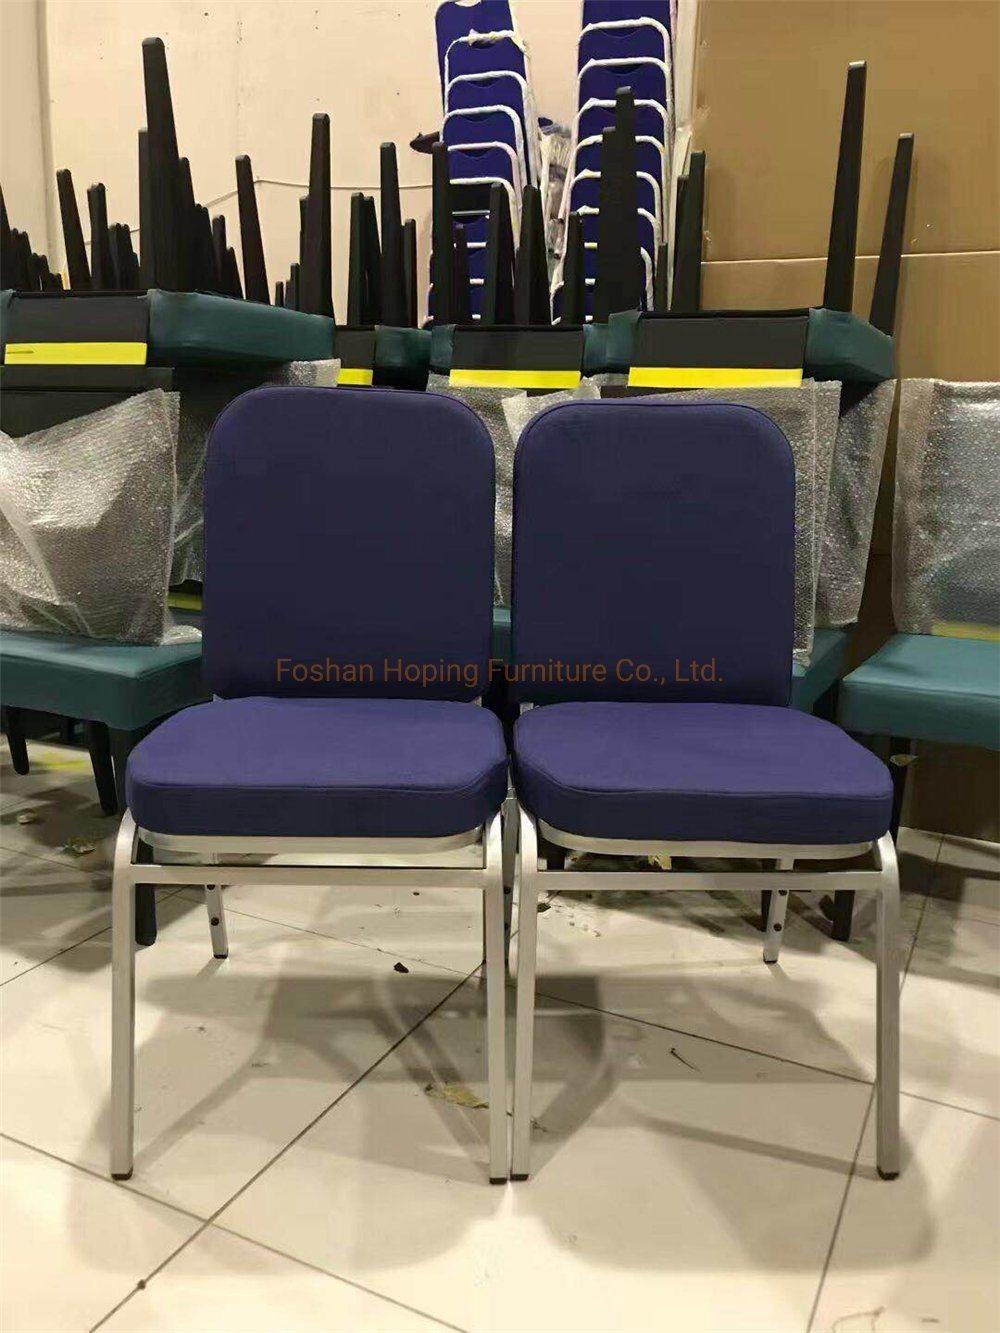 Professional Banquet Chair for Restaurant Conference Catholic Chapel Chair Interlocking Padded Side Back Pocket Bookcase Pulpit Church Chair